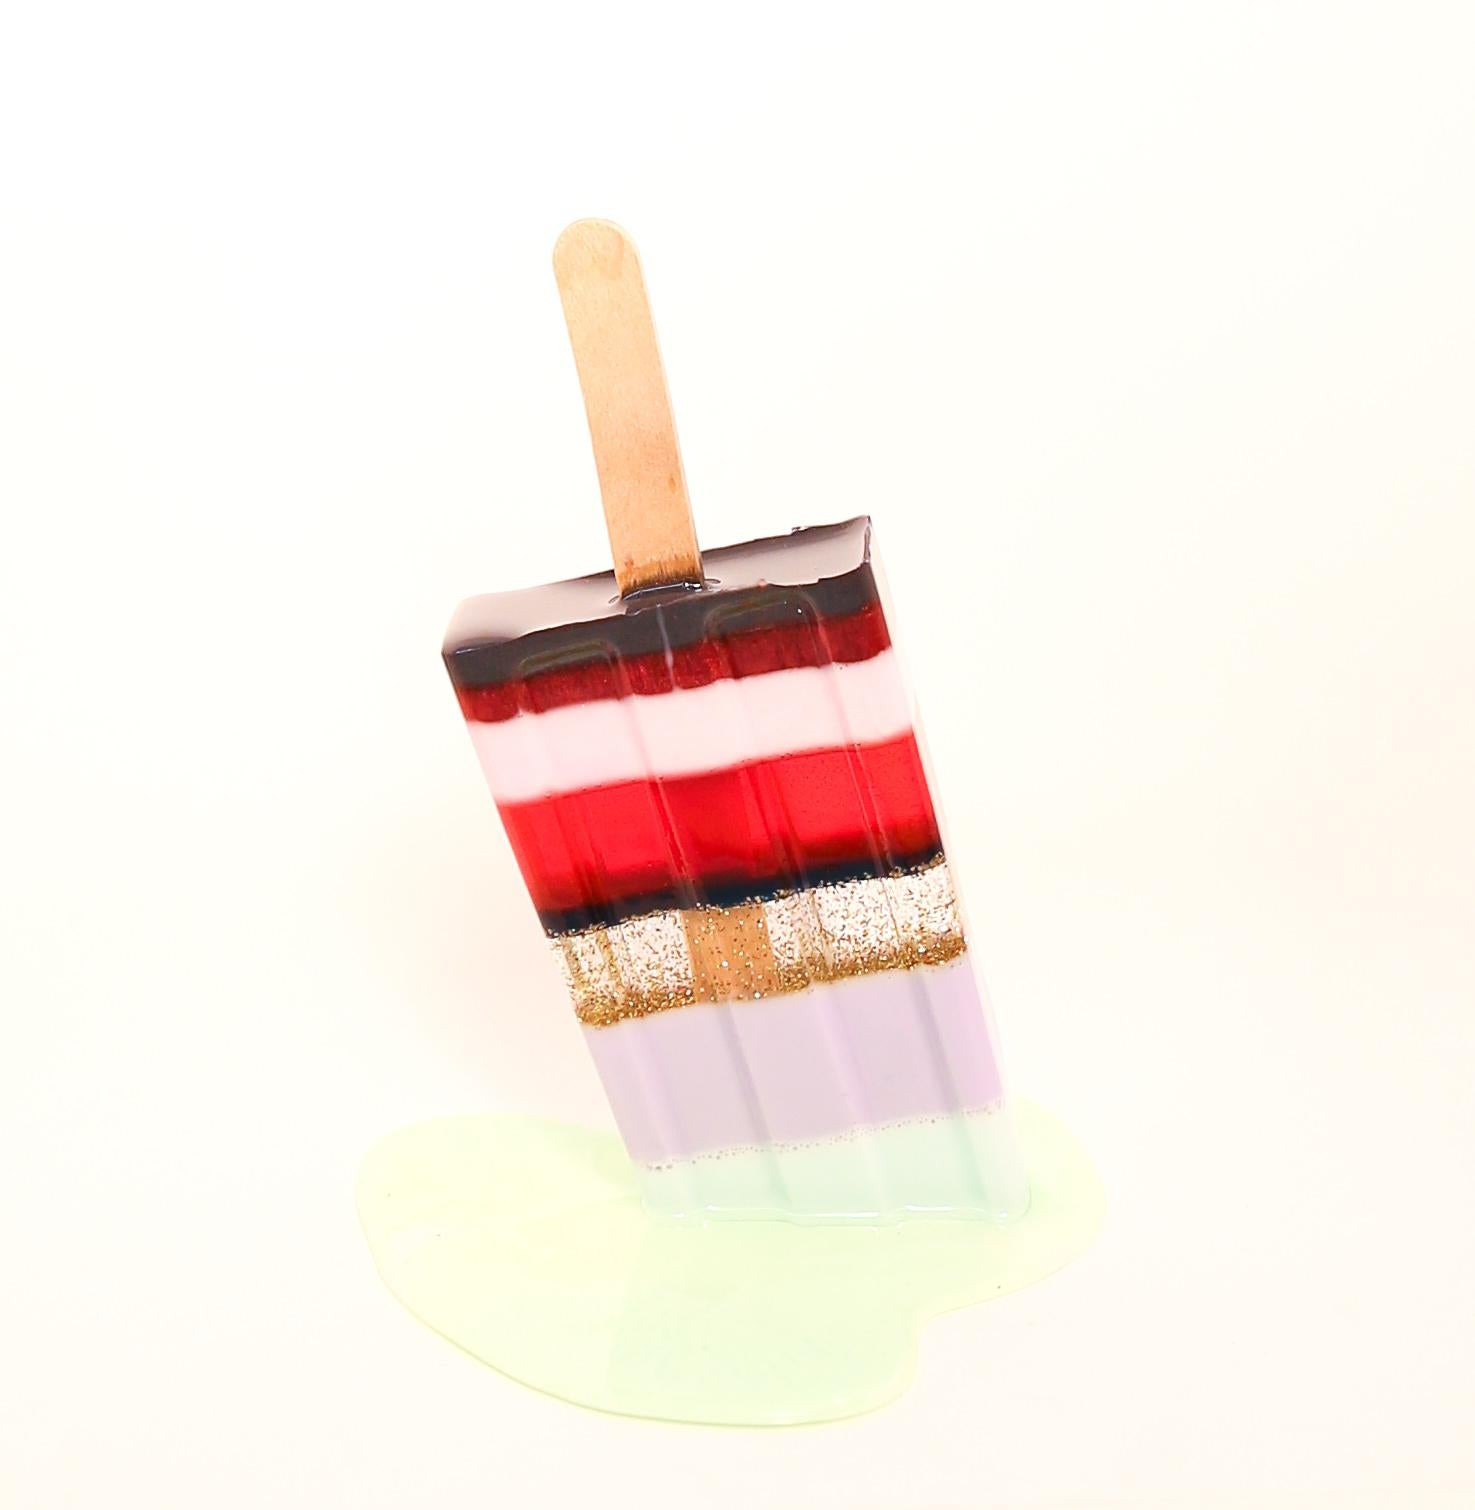 Striped Popsicle  - Original Resin Sculpture by Betsy Enzensberger 2